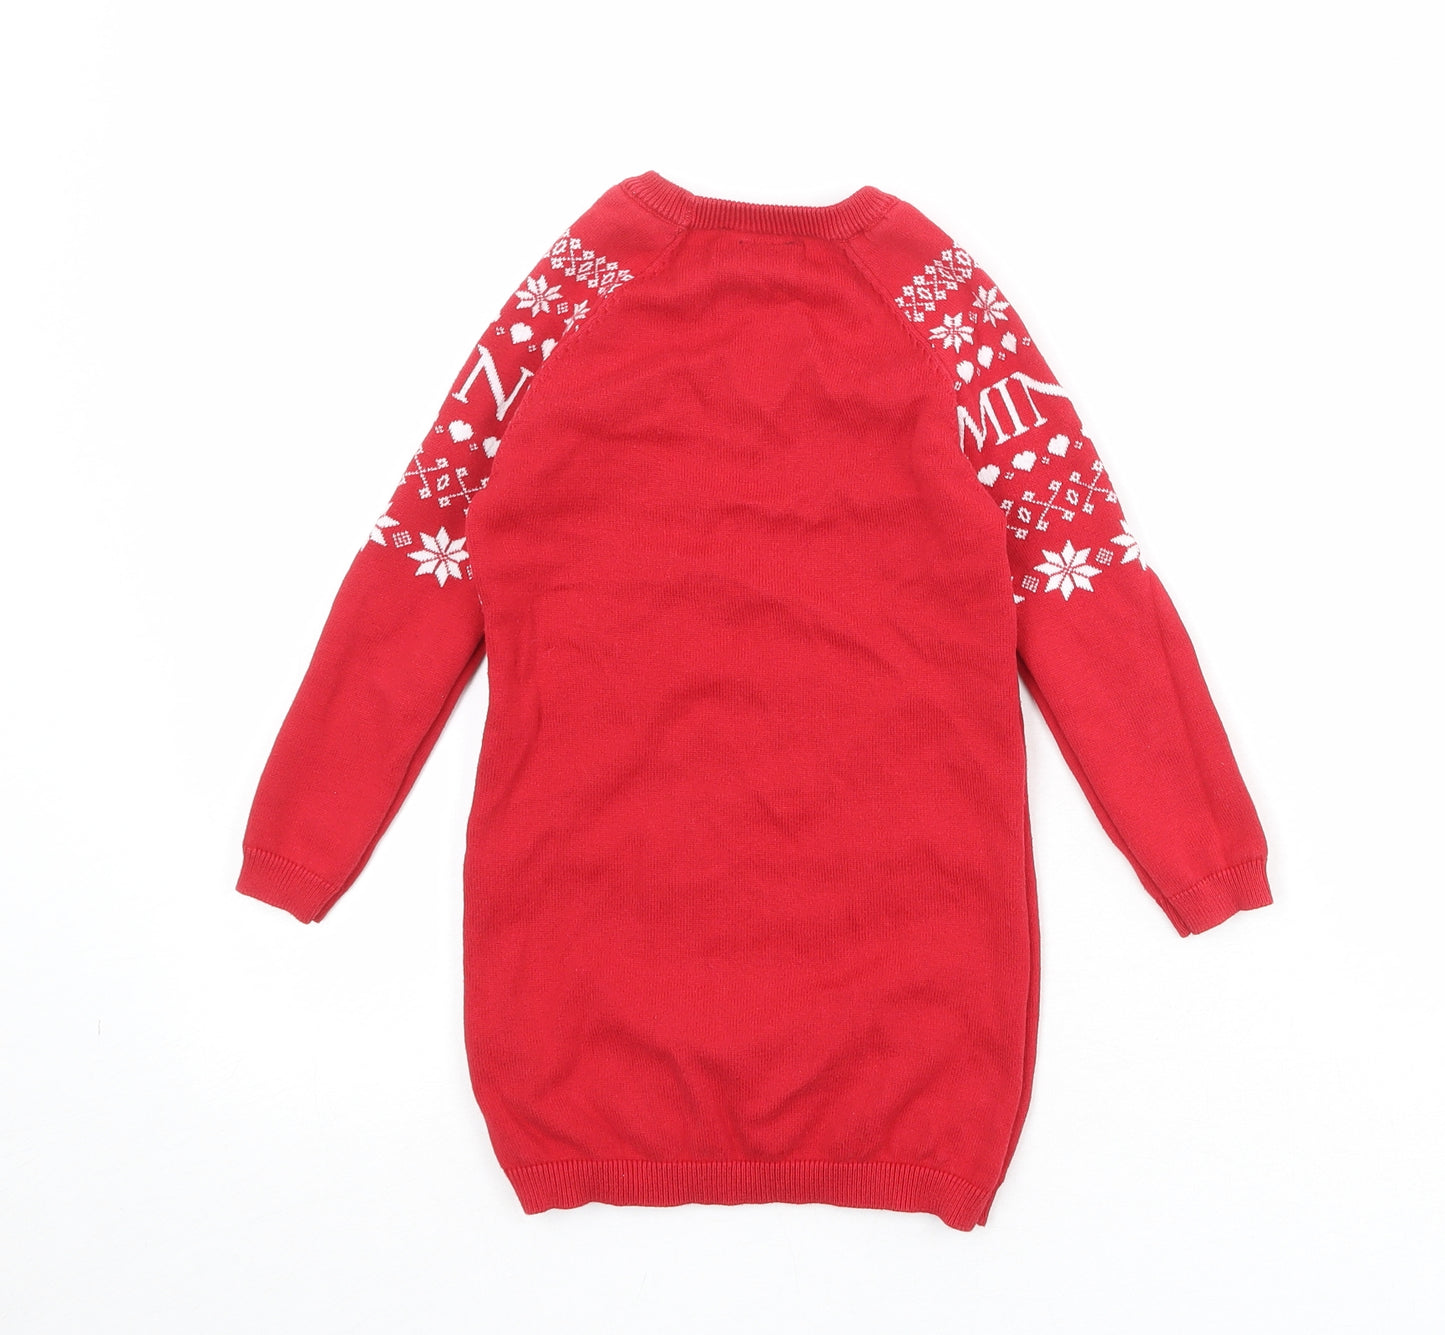 Disney Girls Red Fair Isle Cotton Jumper Dress Size 4-5 Years Crew Neck Pullover - Minnie Mouse Christmas